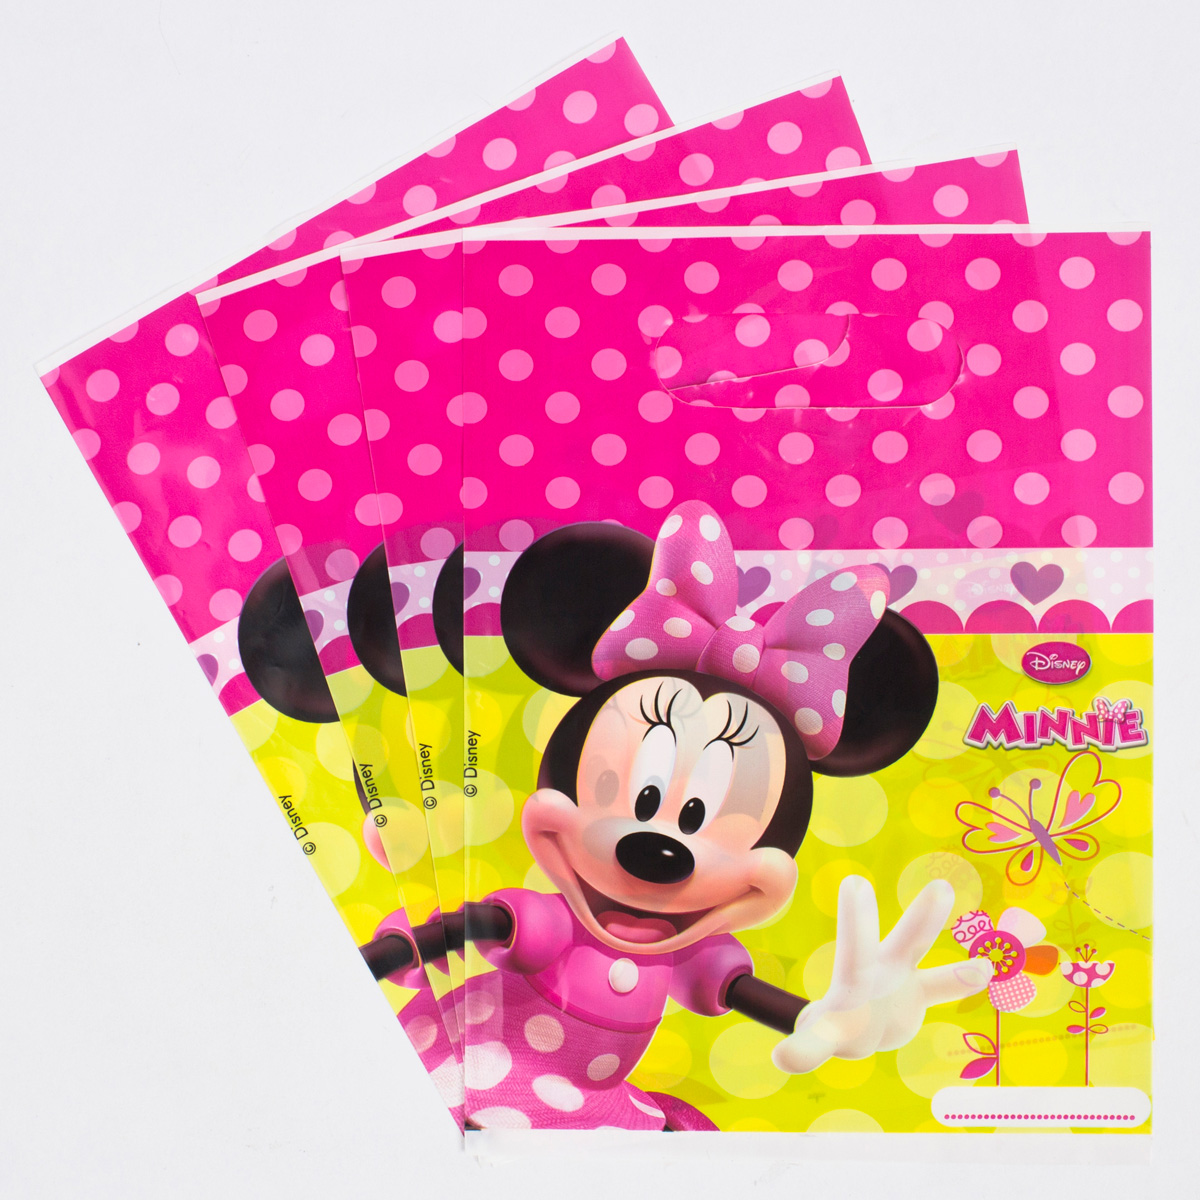 Disney Minnie Mouse Party Bags, Pack Of 6